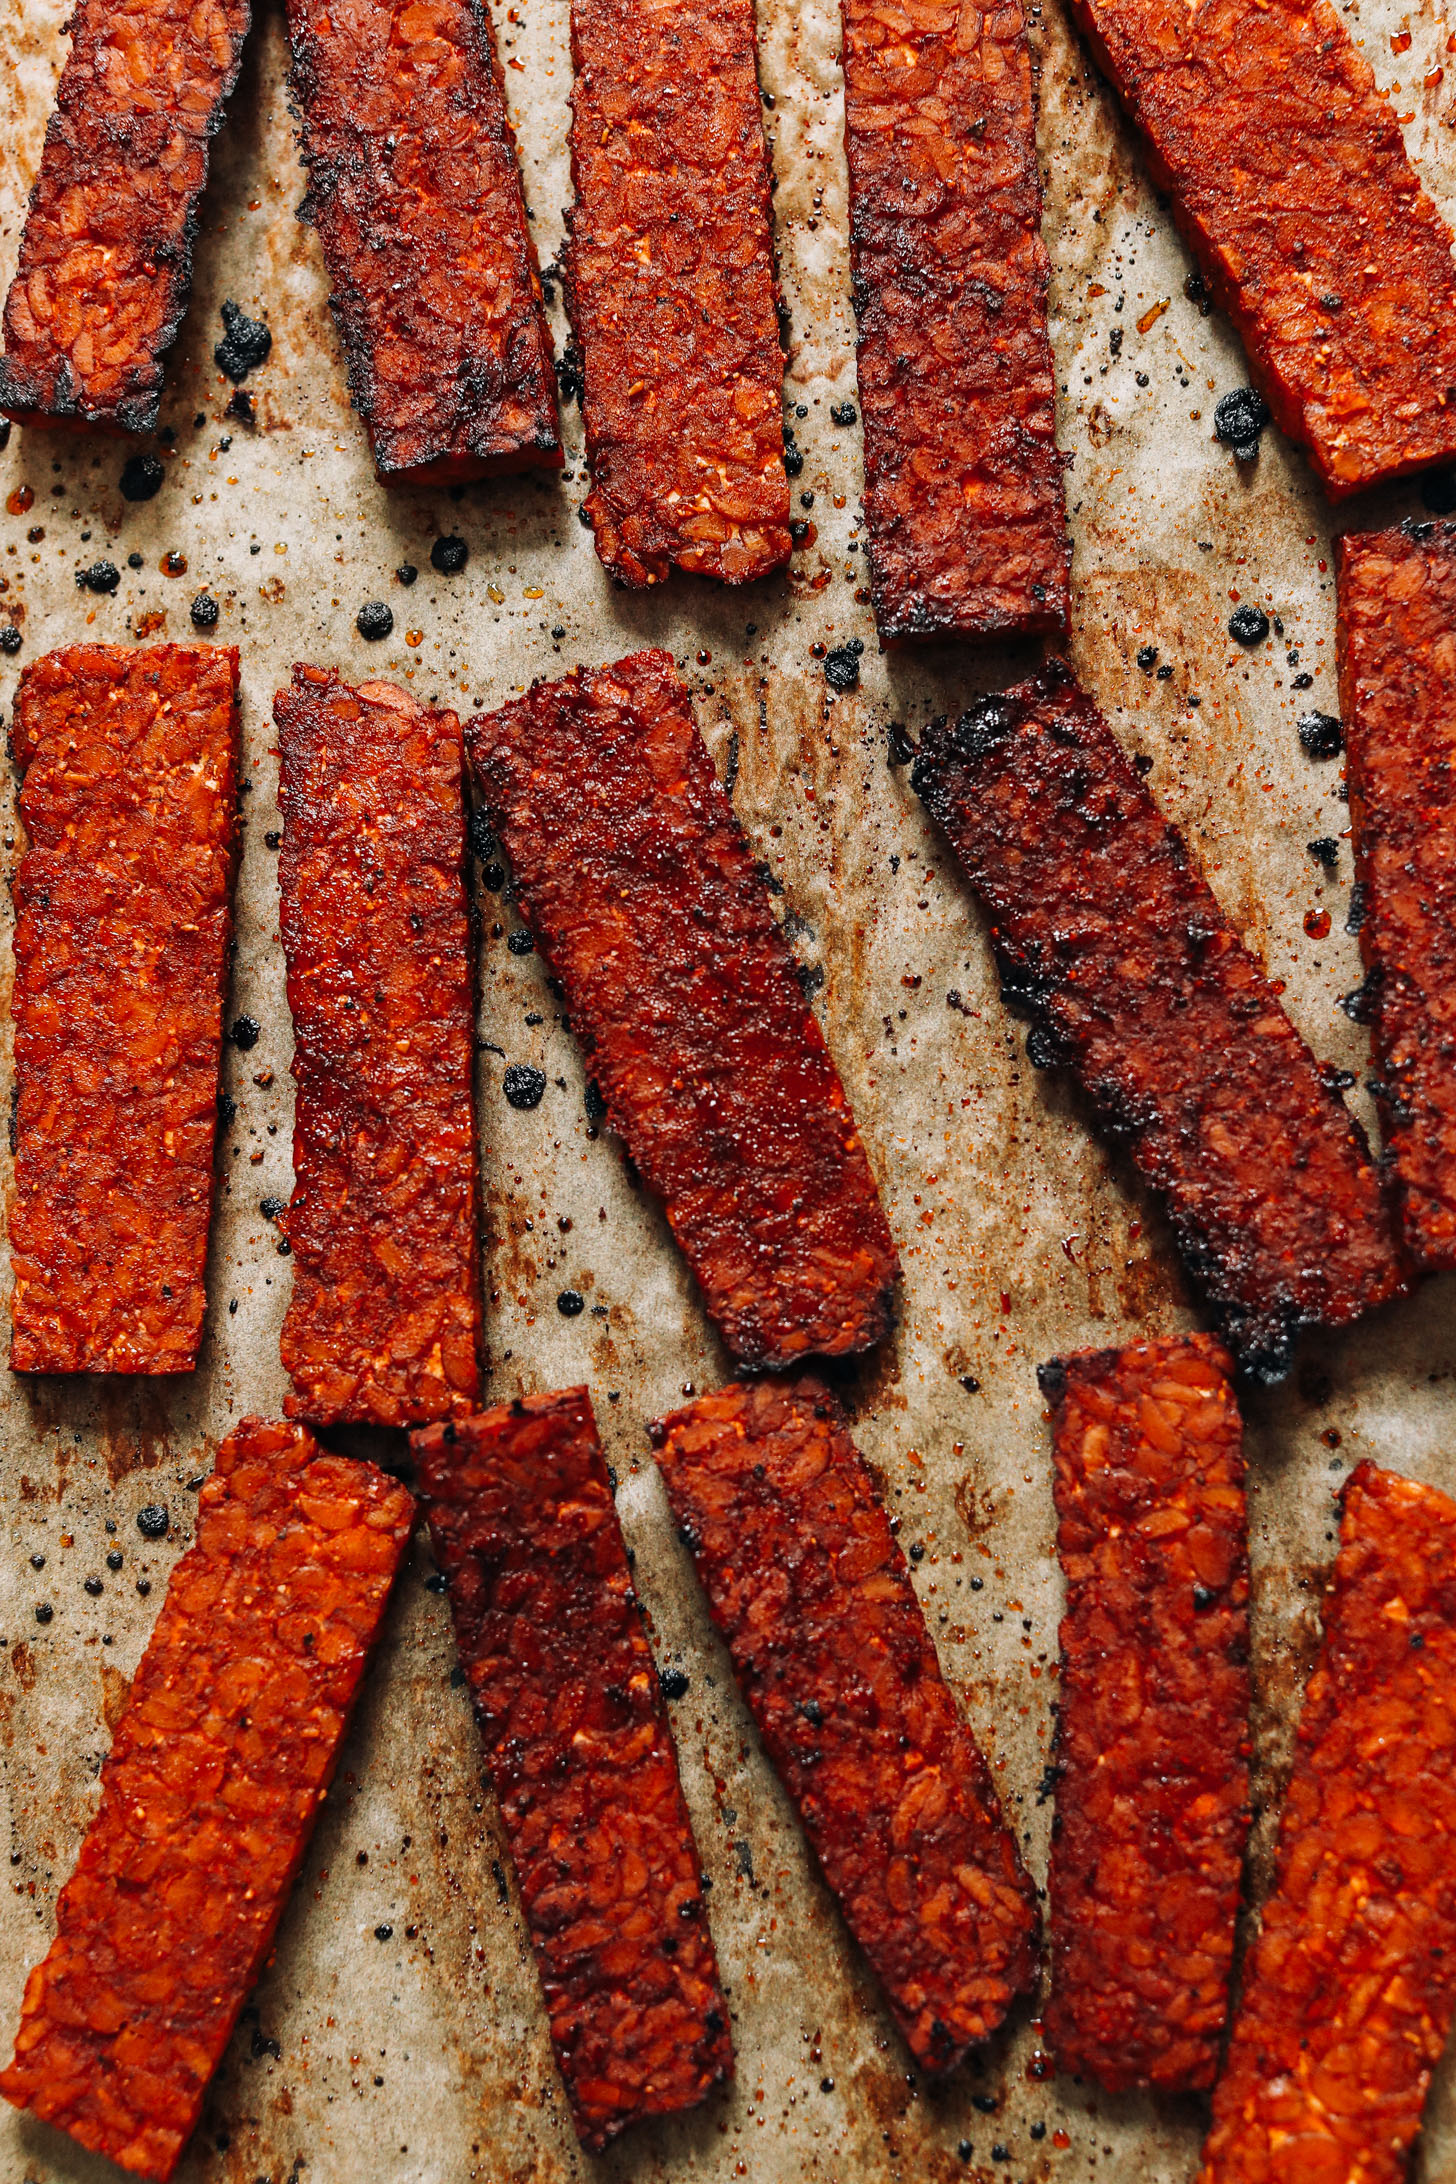 Slices of tempeh bacon on a baking sheet